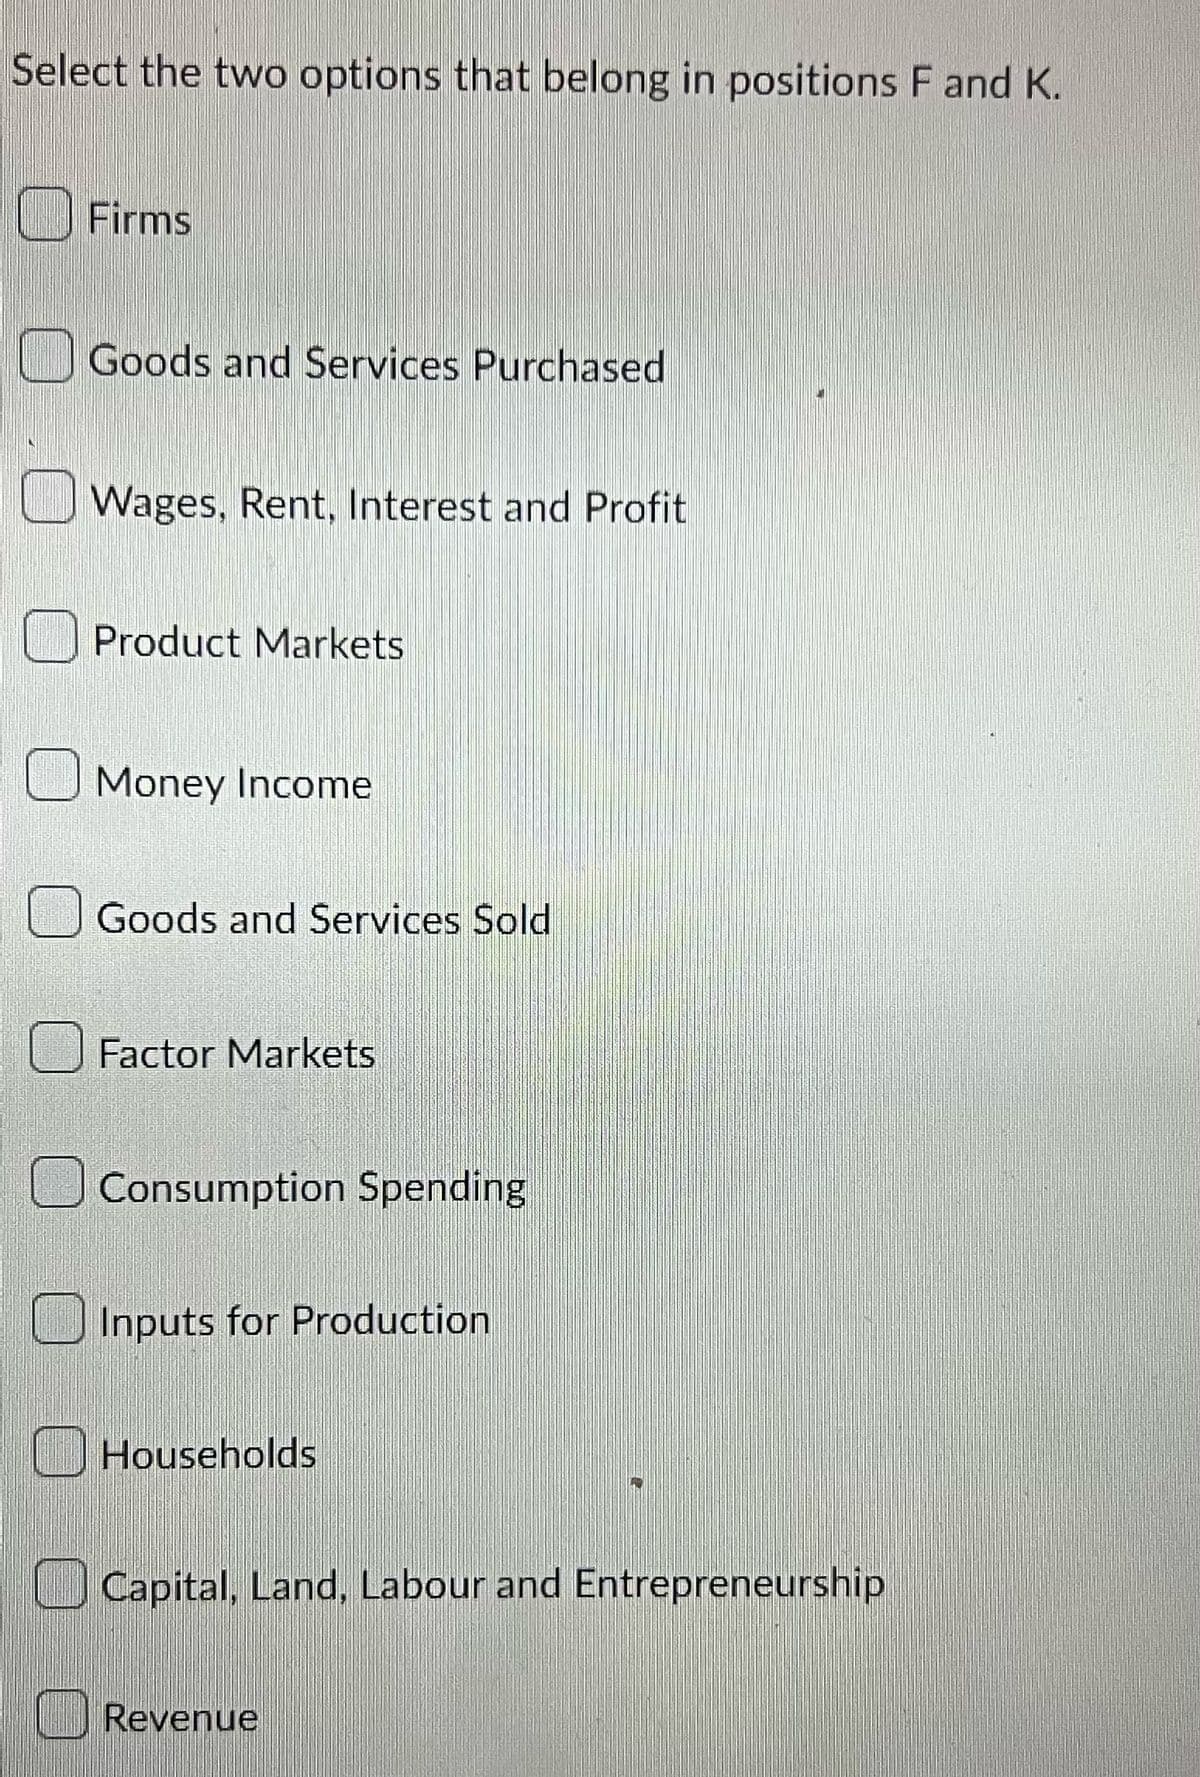 Select the two options that belong in positions F and K.
Firms
Goods and Services Purchased
U
Wages, Rent, Interest and Profit
Product Markets
Money Income
Goods and Services Sold
Factor Markets
Consumption Spending
Inputs for Production
Households
Capital, Land, Labour and Entrepreneurship
Revenue